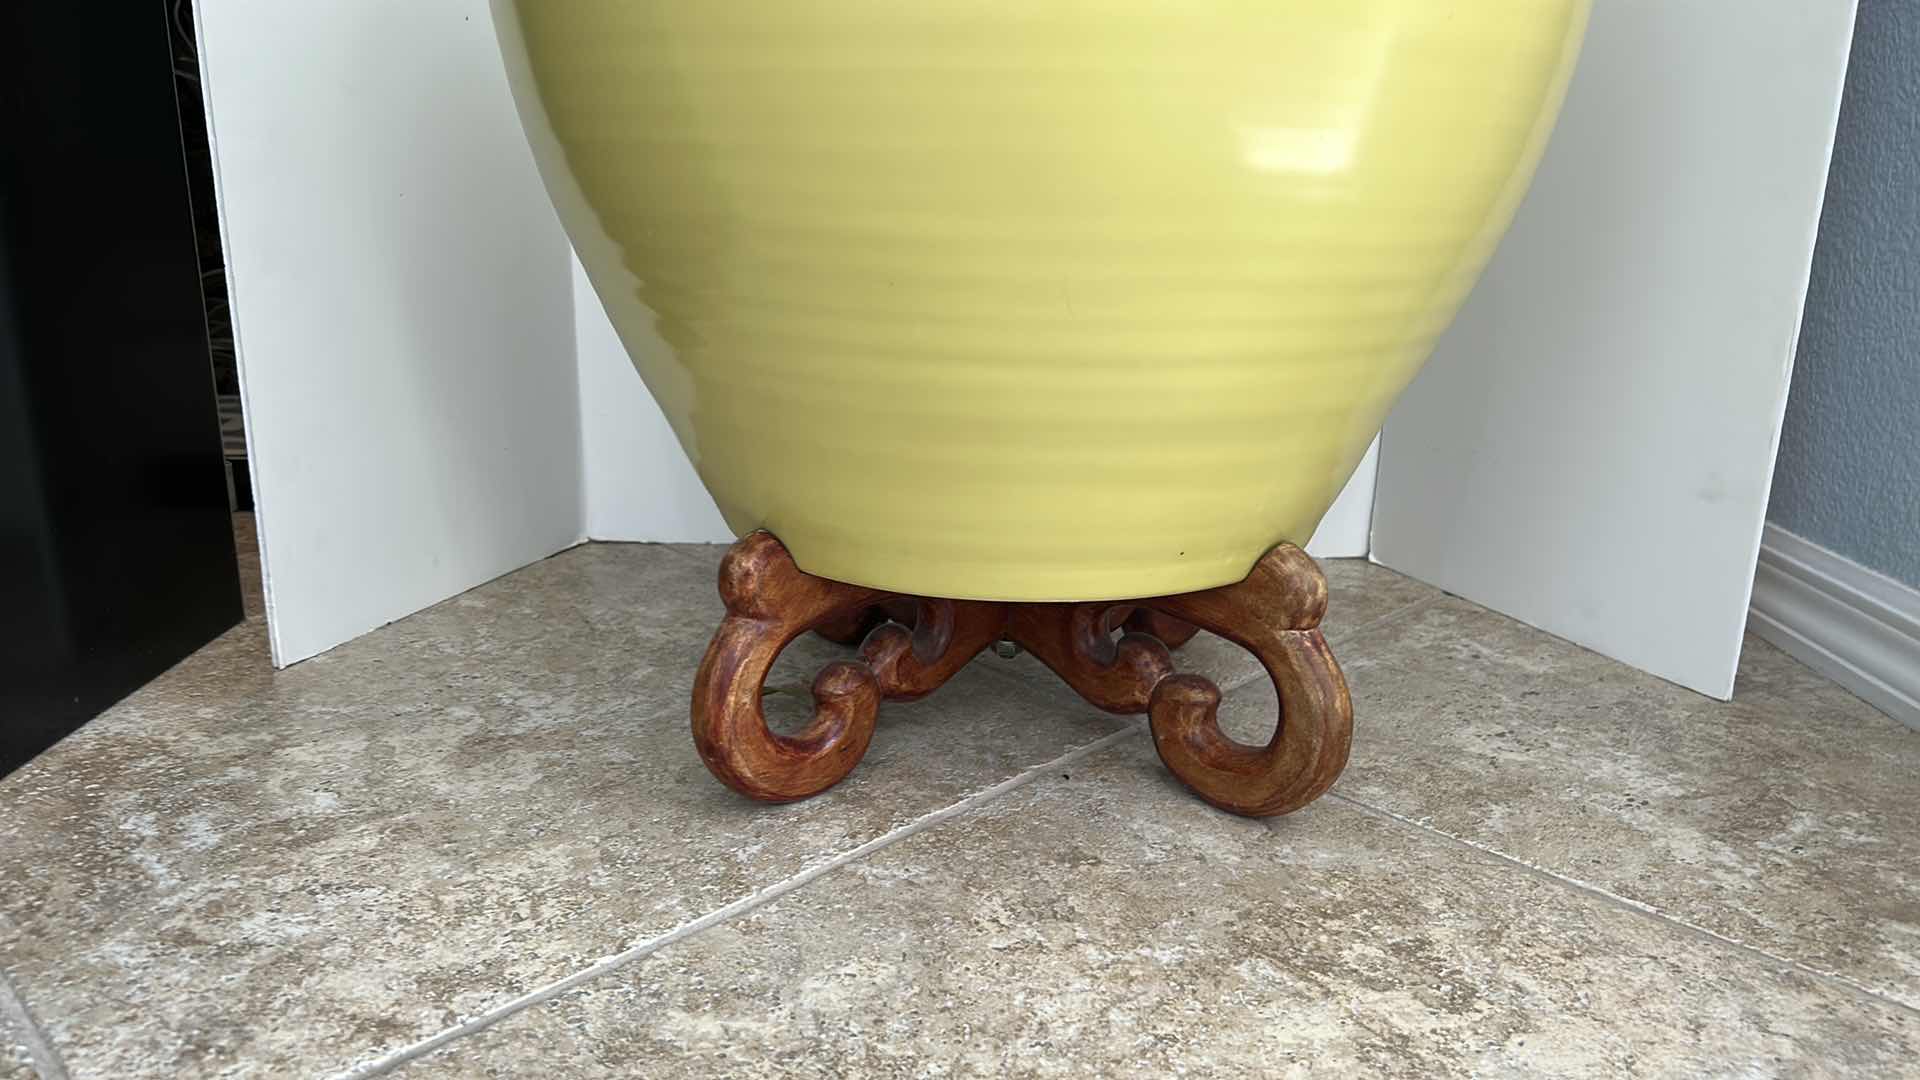 Photo 4 of LARGE YELLOW CERAMIC POTTERY W WOOD STAND AND LIVE MONEY TREE (POT IS 19” x 17”)